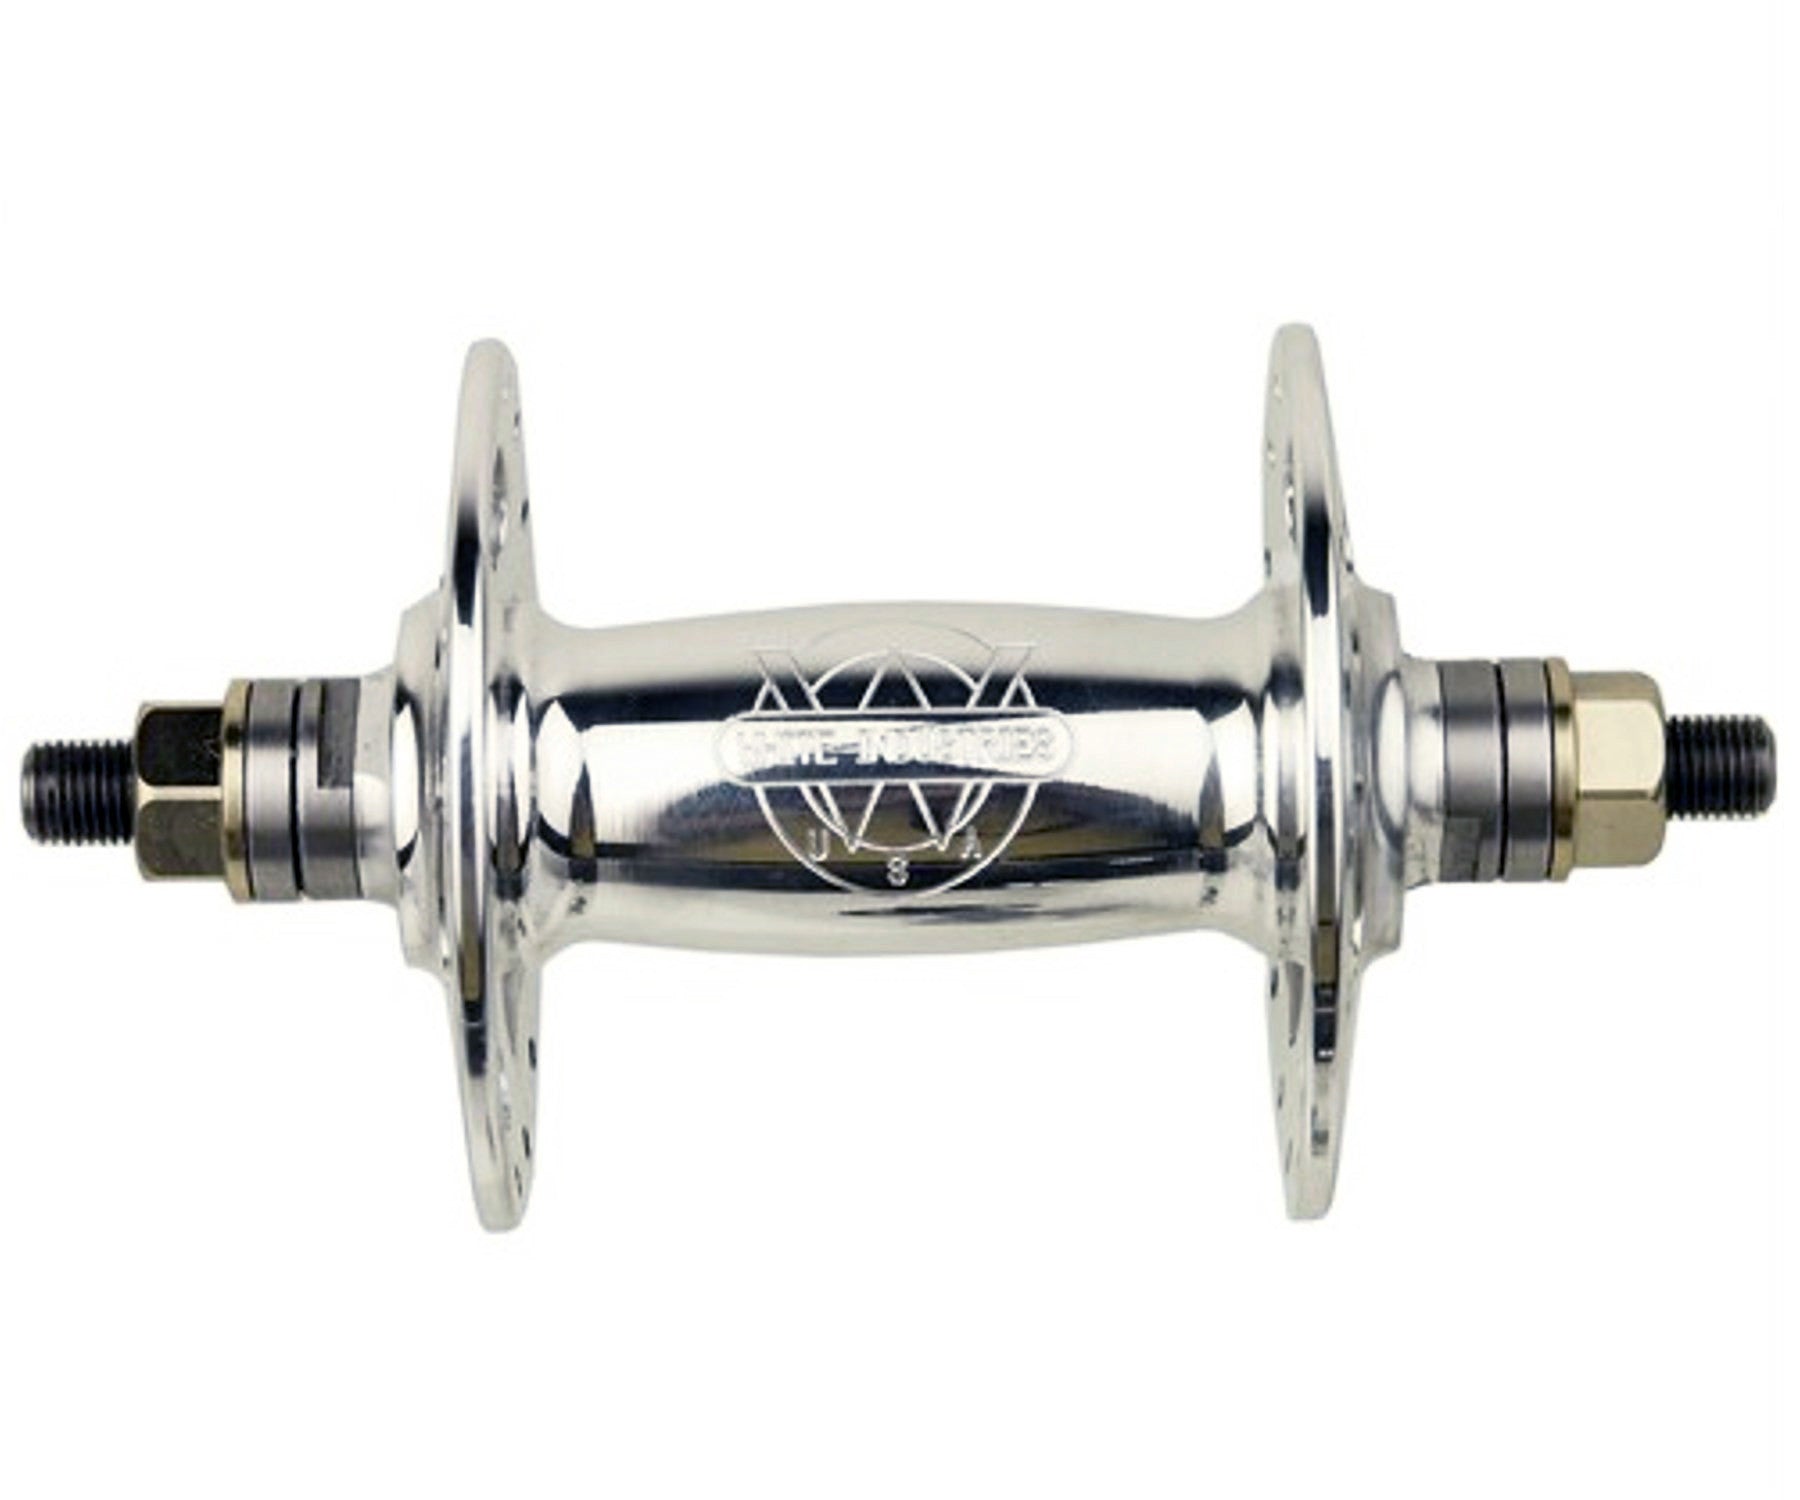 White Industries front track hub